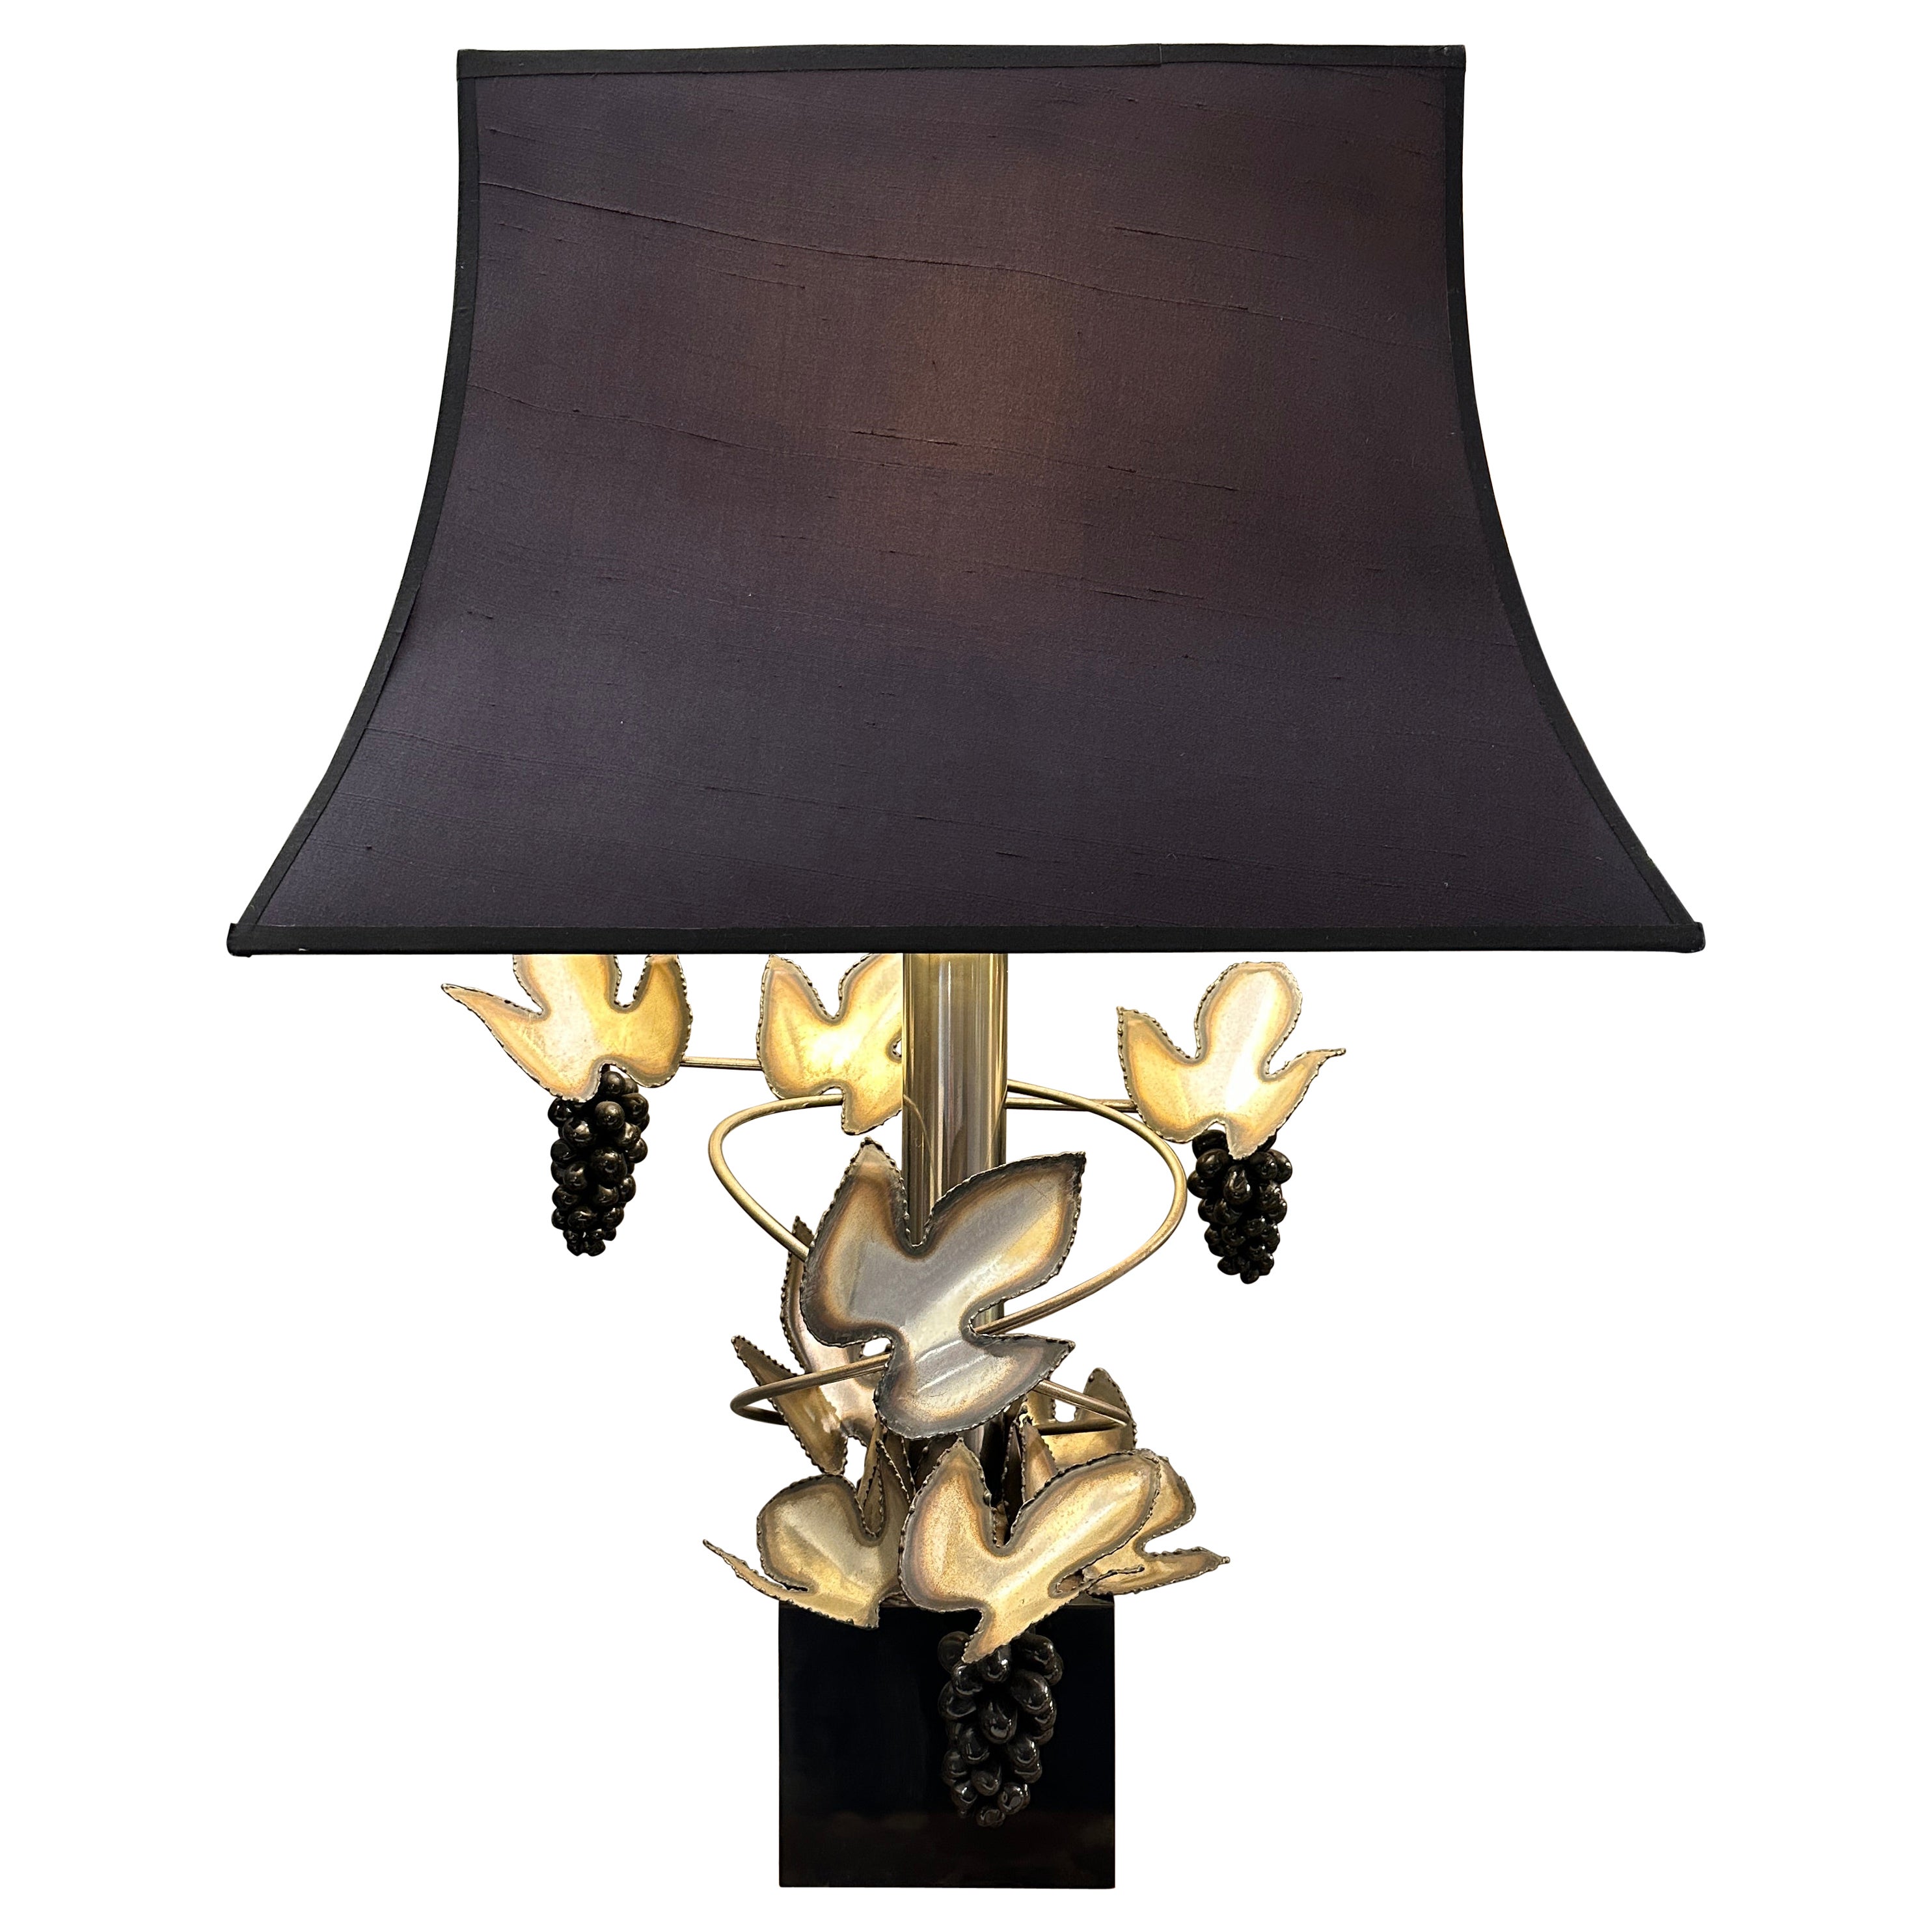 Large French Table Lamp by Maison Jansen